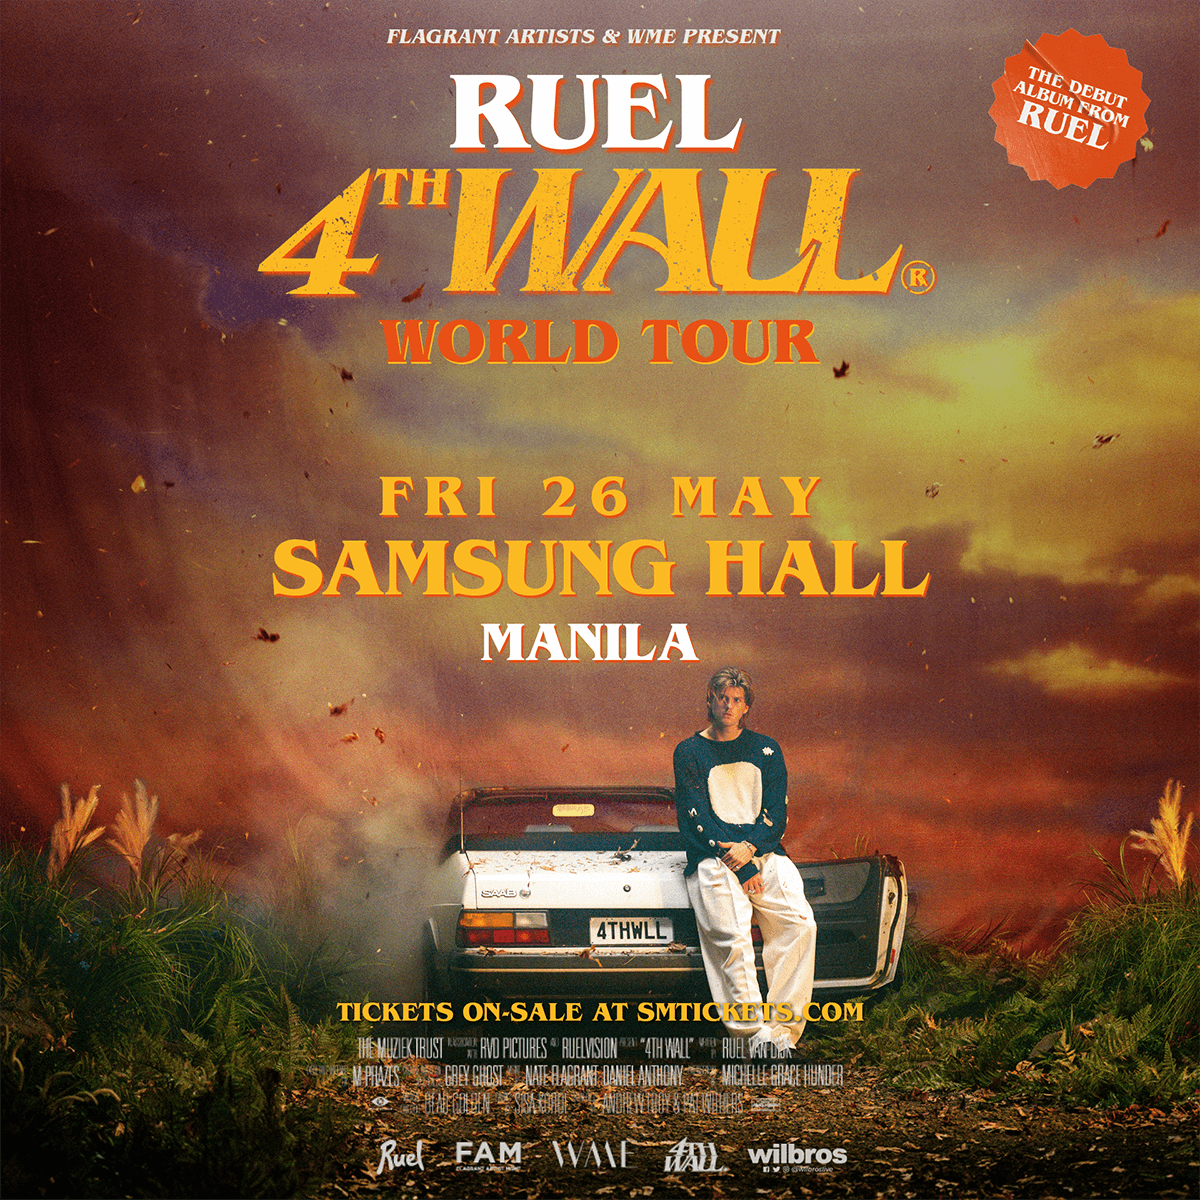 Ruel – Coming Back to Manila for 4TH WALL World Tour